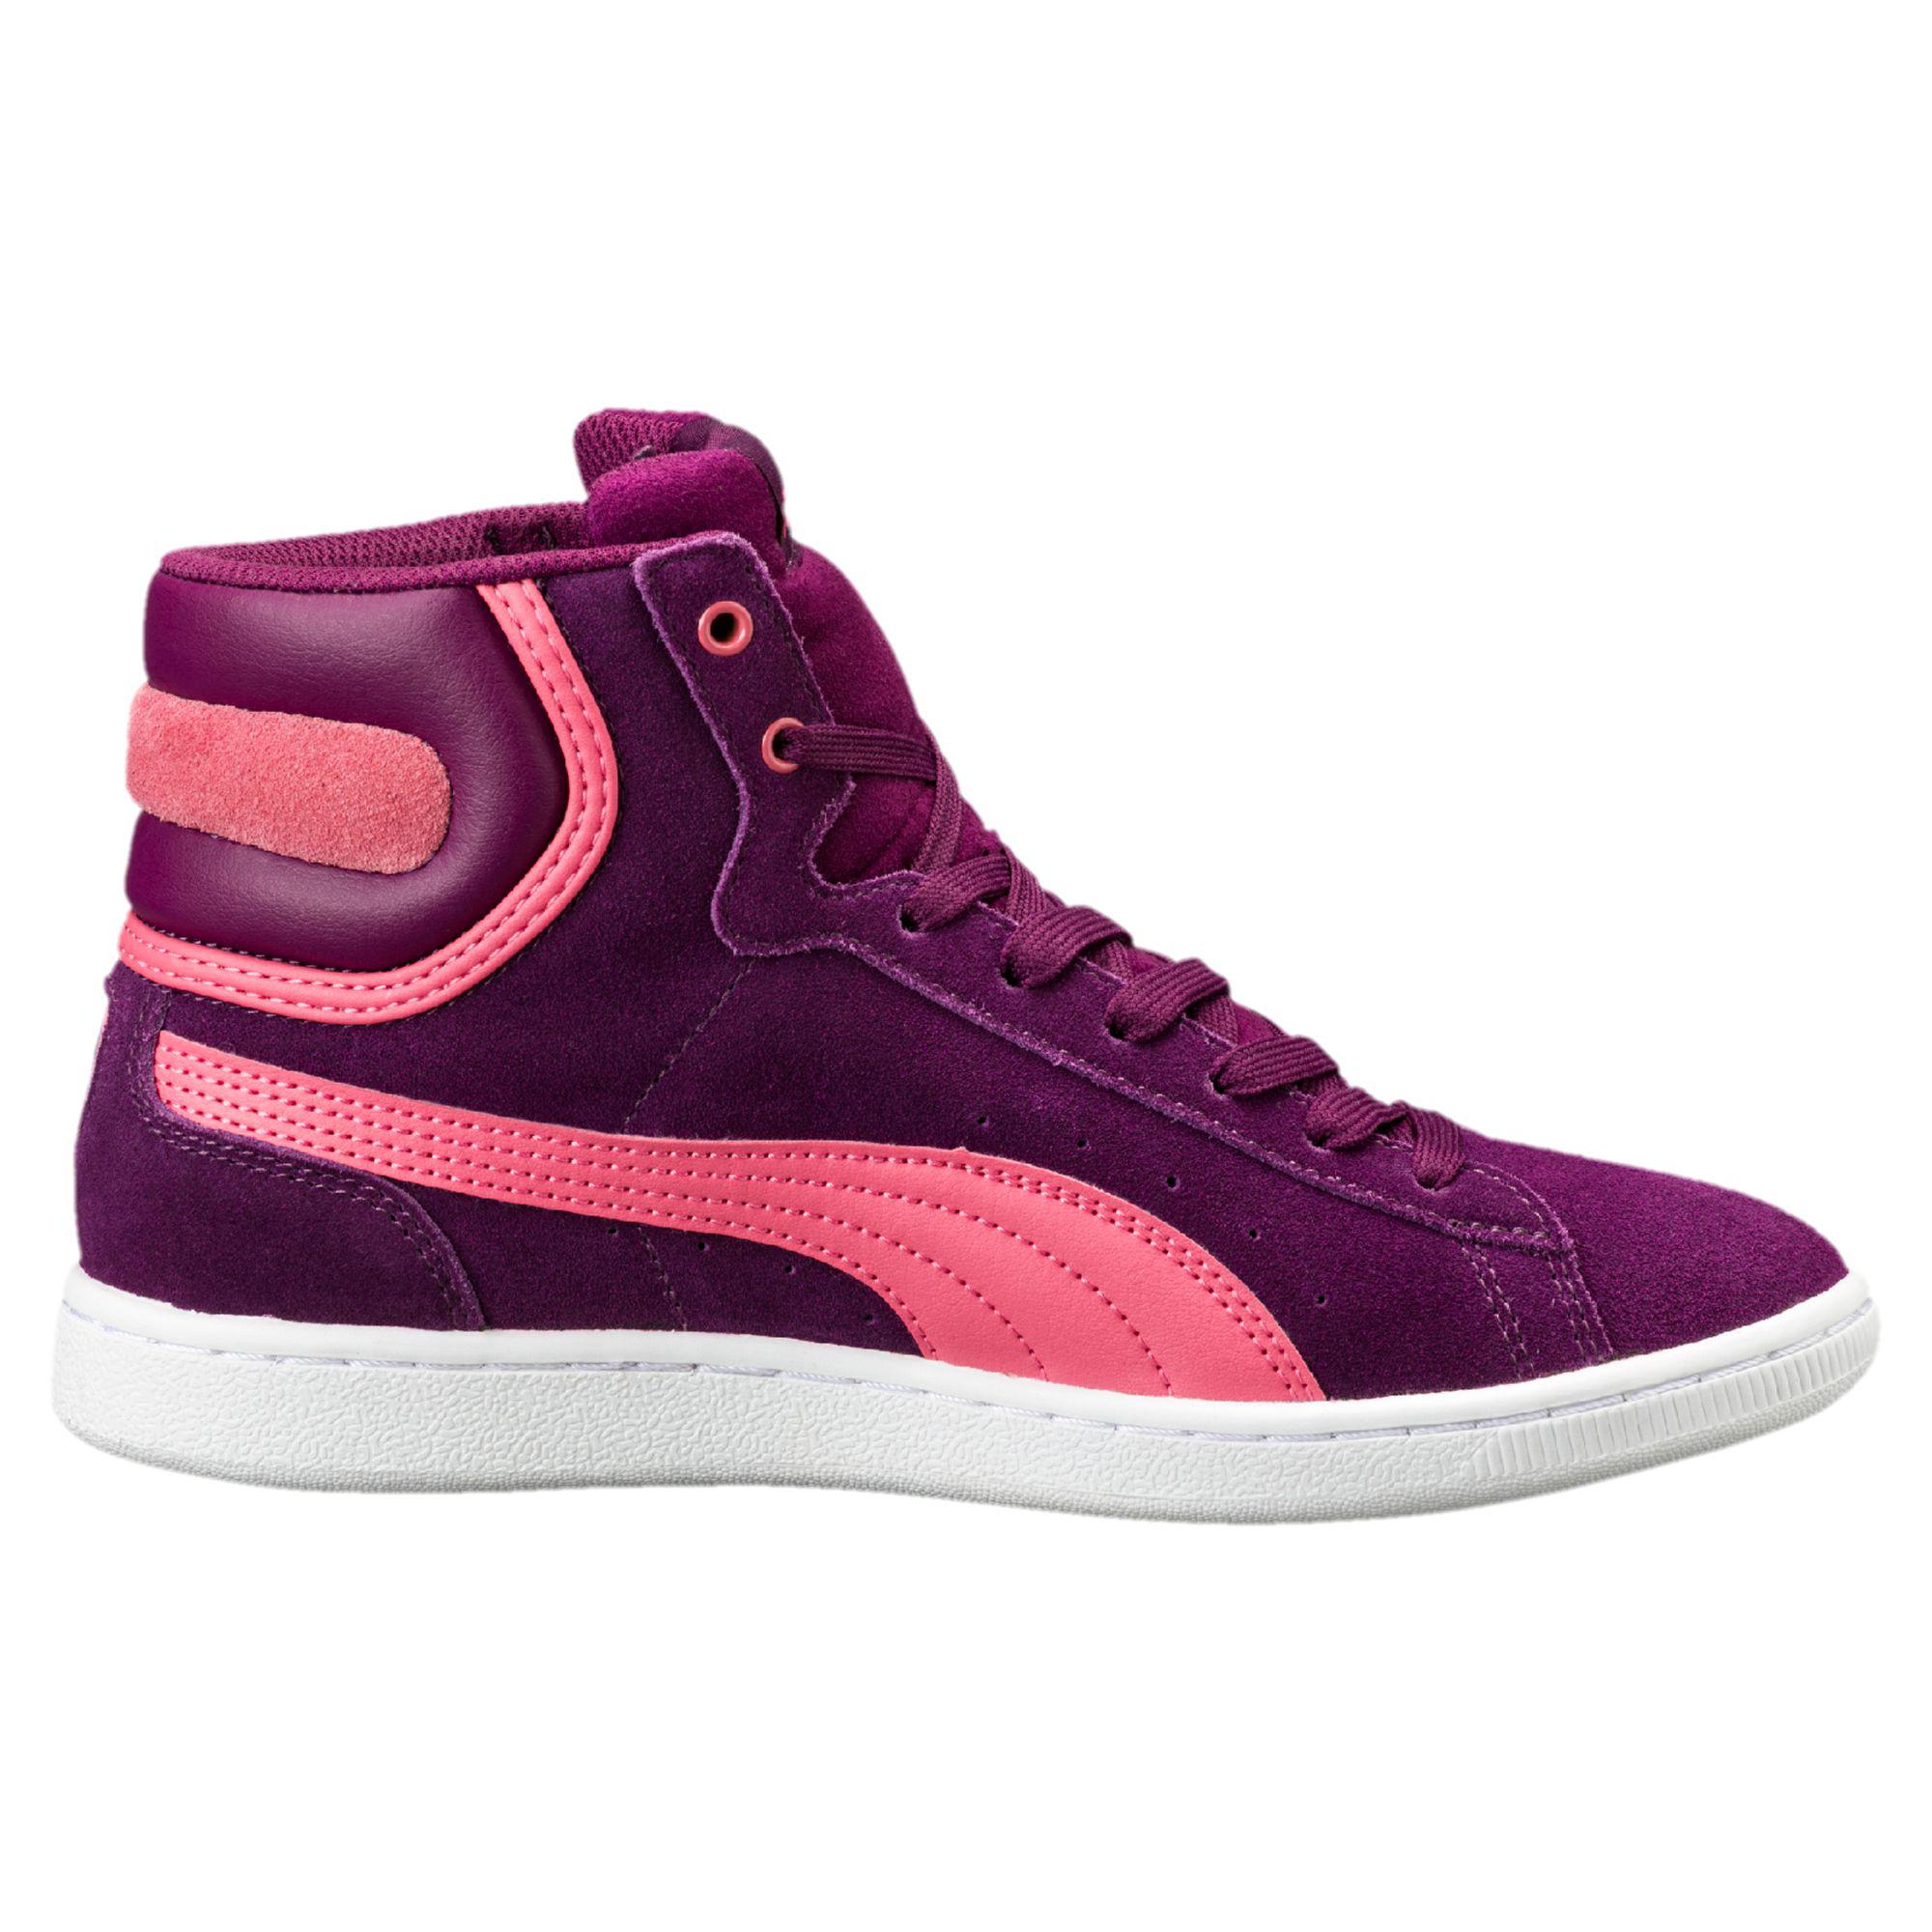 PUMA Suede Vikky Mid Women's High Top Sneakers in Purple | Lyst